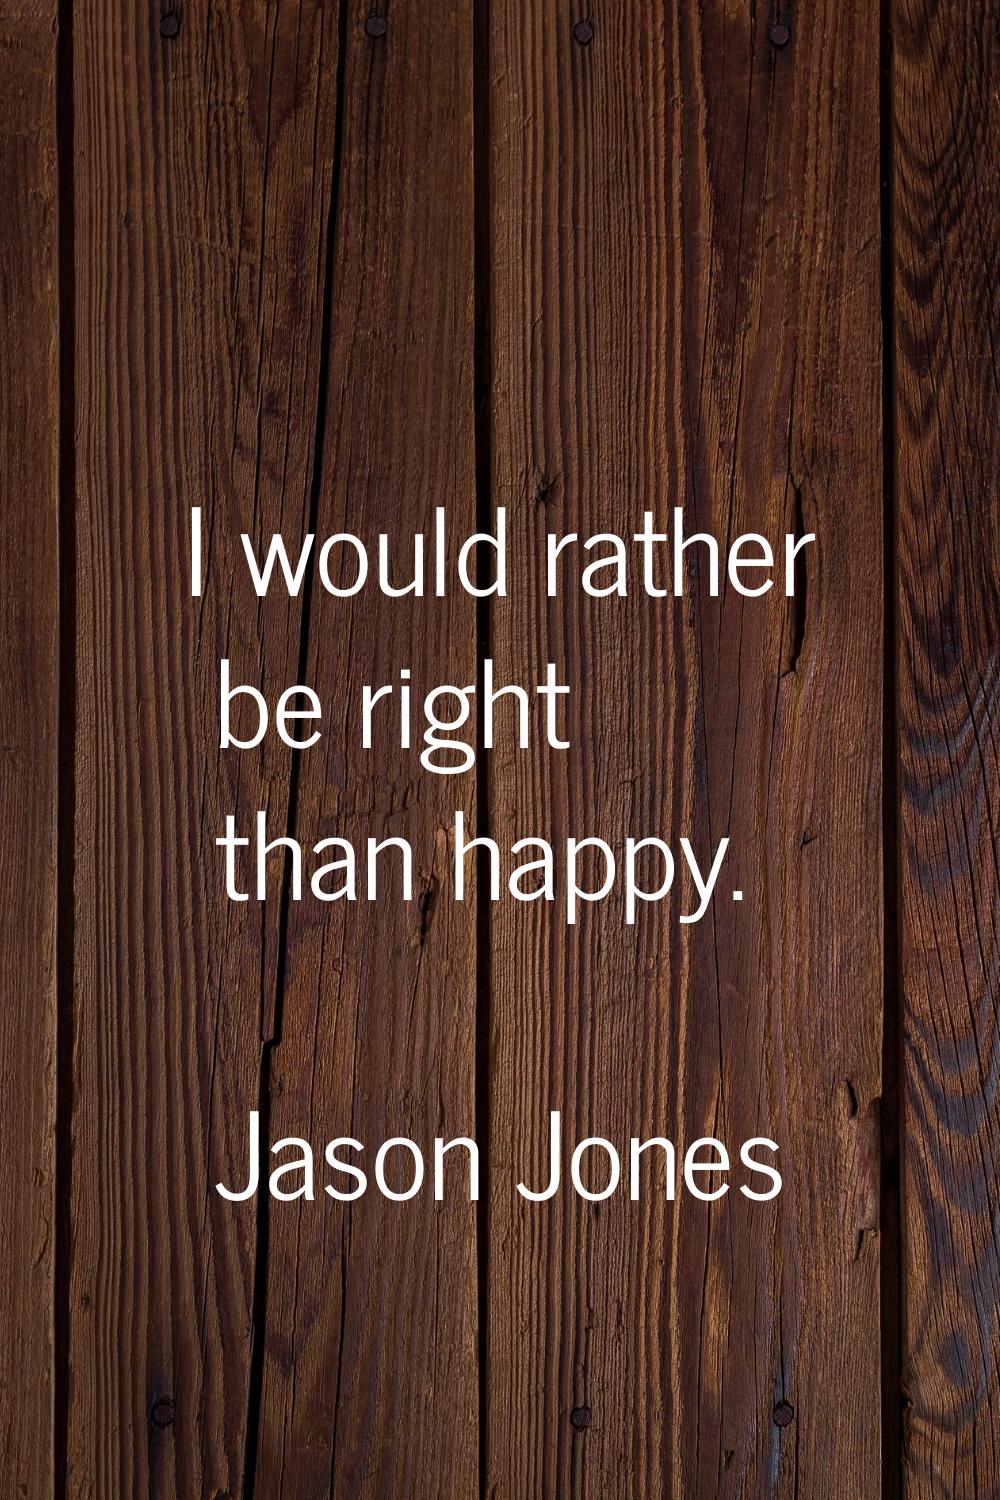 I would rather be right than happy.